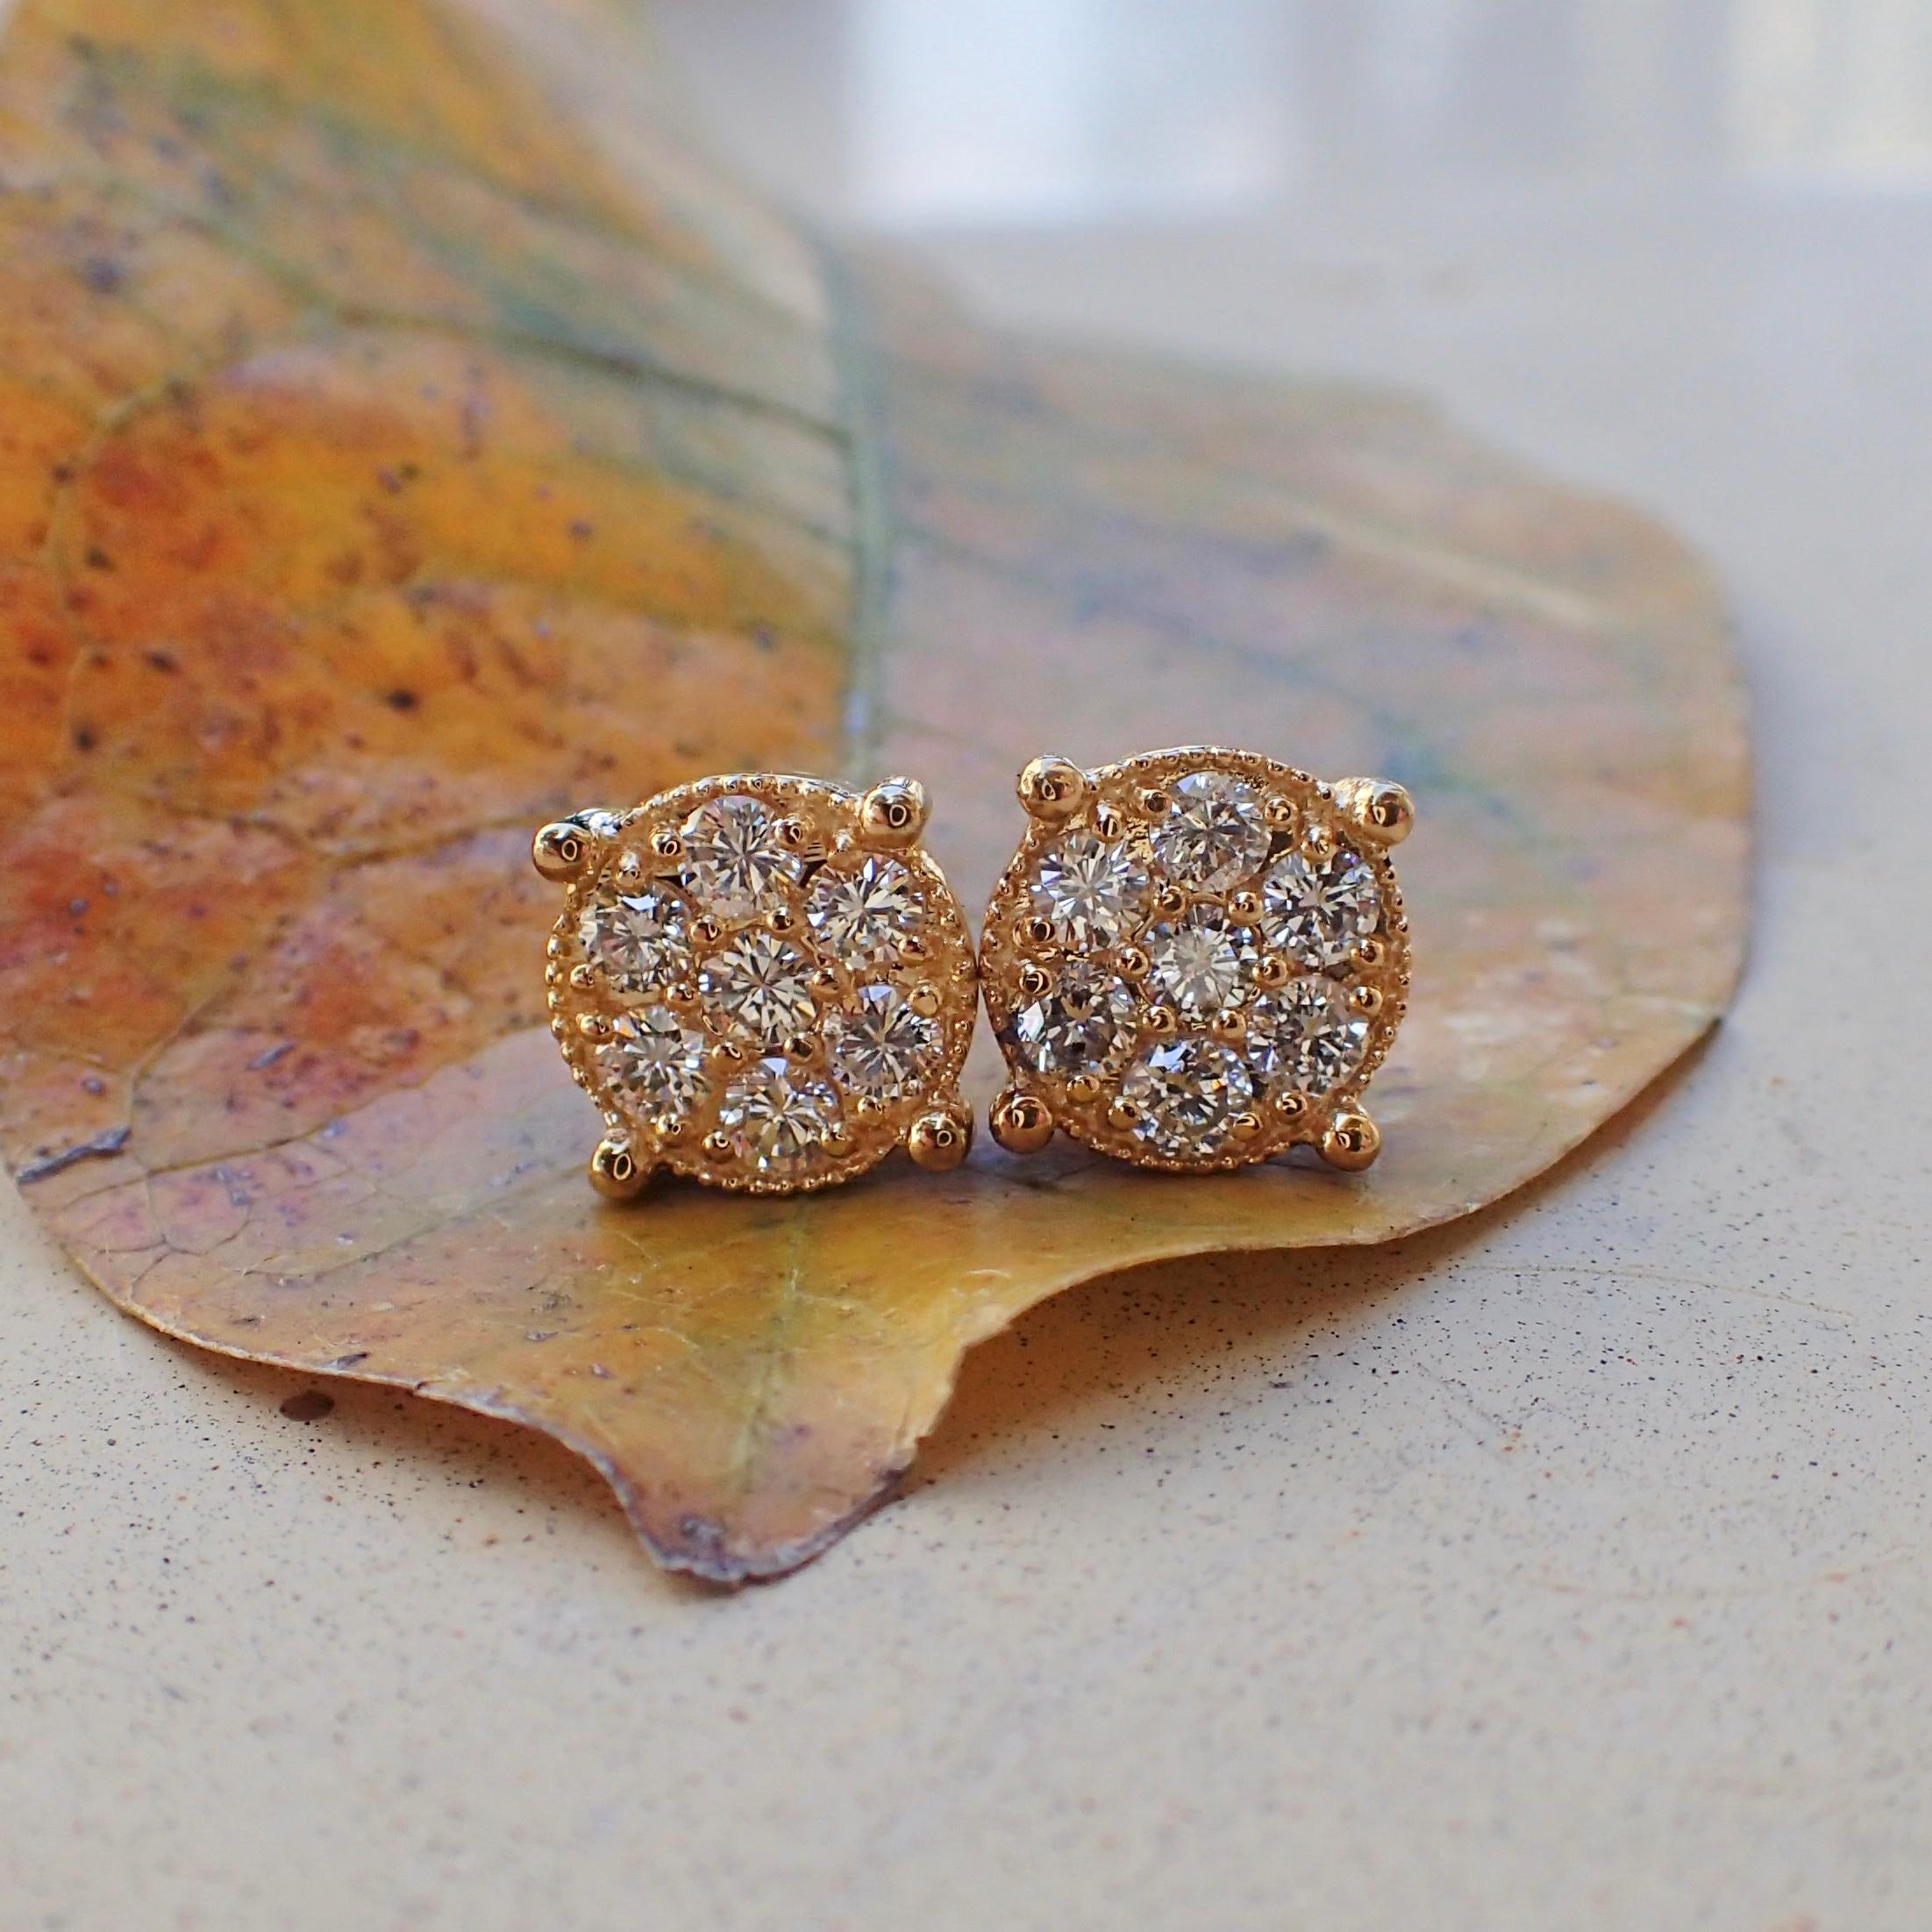 A pair of 18k yellow gold earrings are prong set with two (2) Round Brilliant Cut diamonds measuring 2.6mm x 2.6mm that weigh a total of 0.14 carats with Cold Grade H and Clarity Grade VS-SI and surrounding the center stones are twelve (12) prong